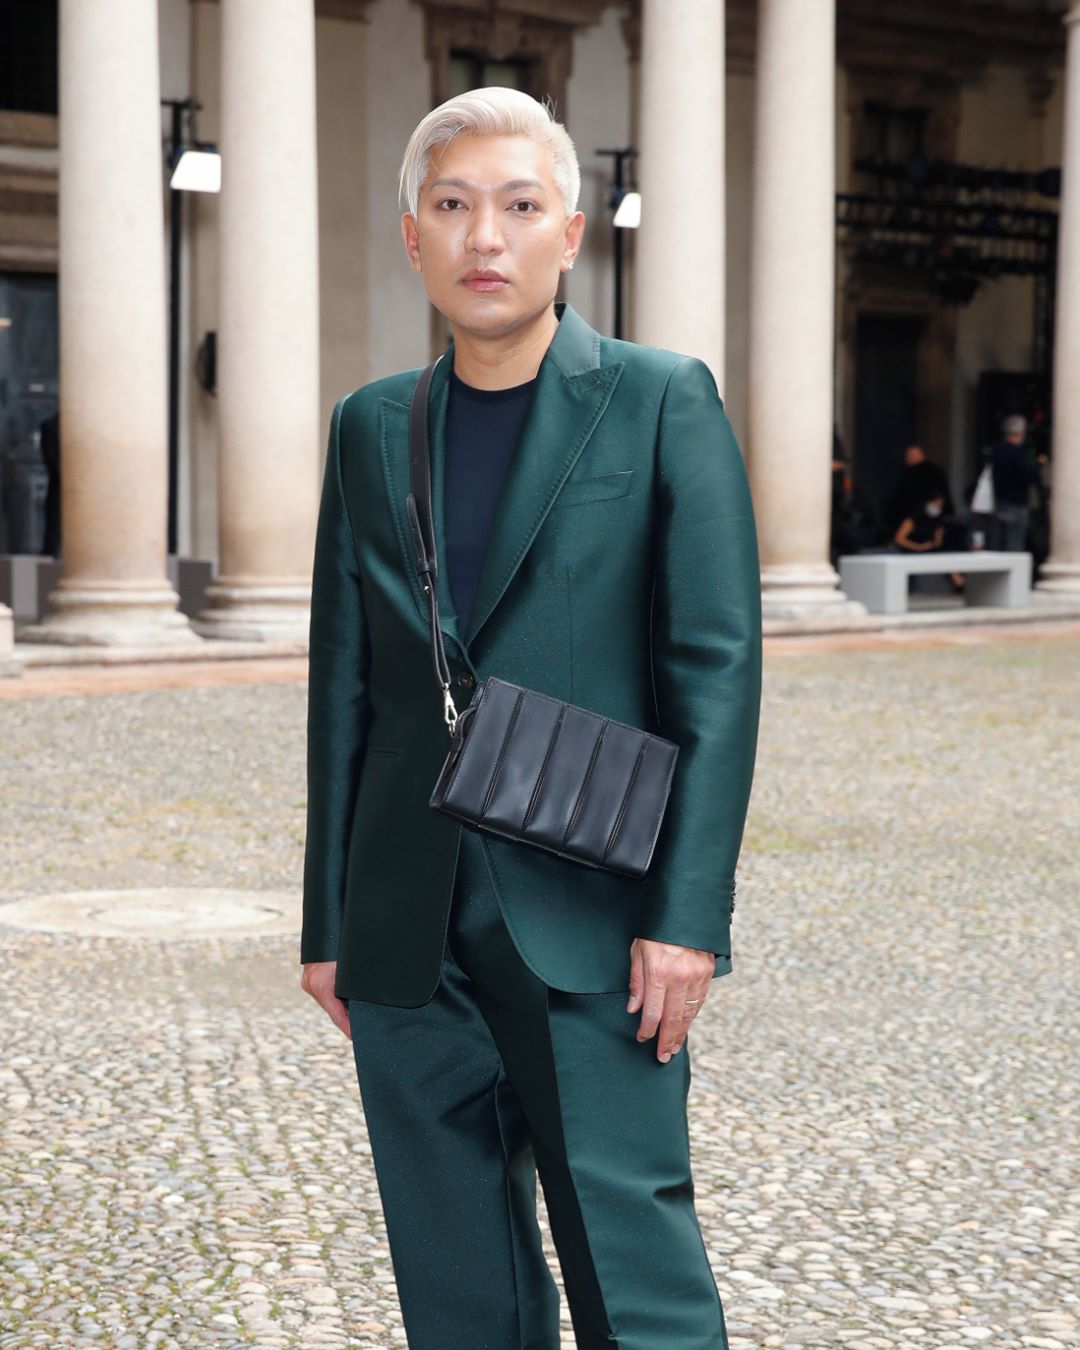 Max Mara - @bryanboy is seen in the tailored #MaxMaraFW20 emerald suit paired with the new navy #WhitneyBag moments before the #MaxMaraSS21 runway show begins. #MFW